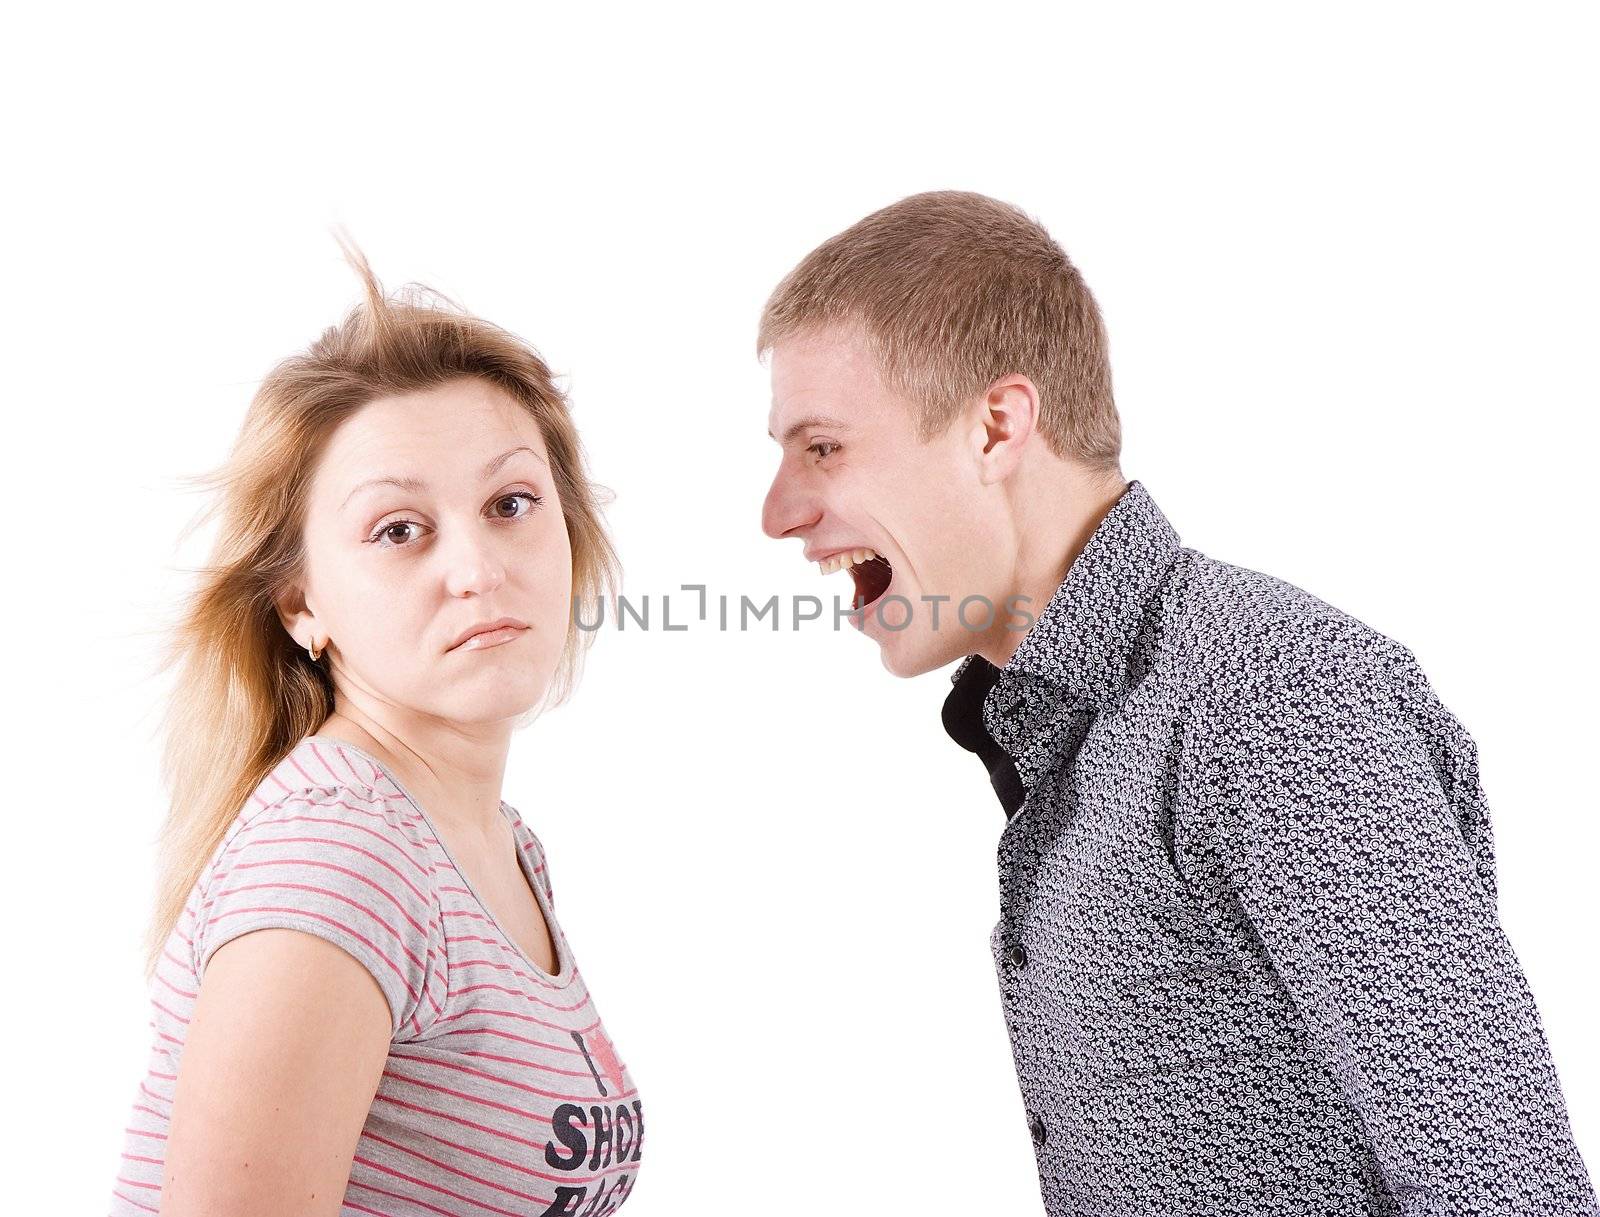 On white background the young man strongly shouts at the young woman